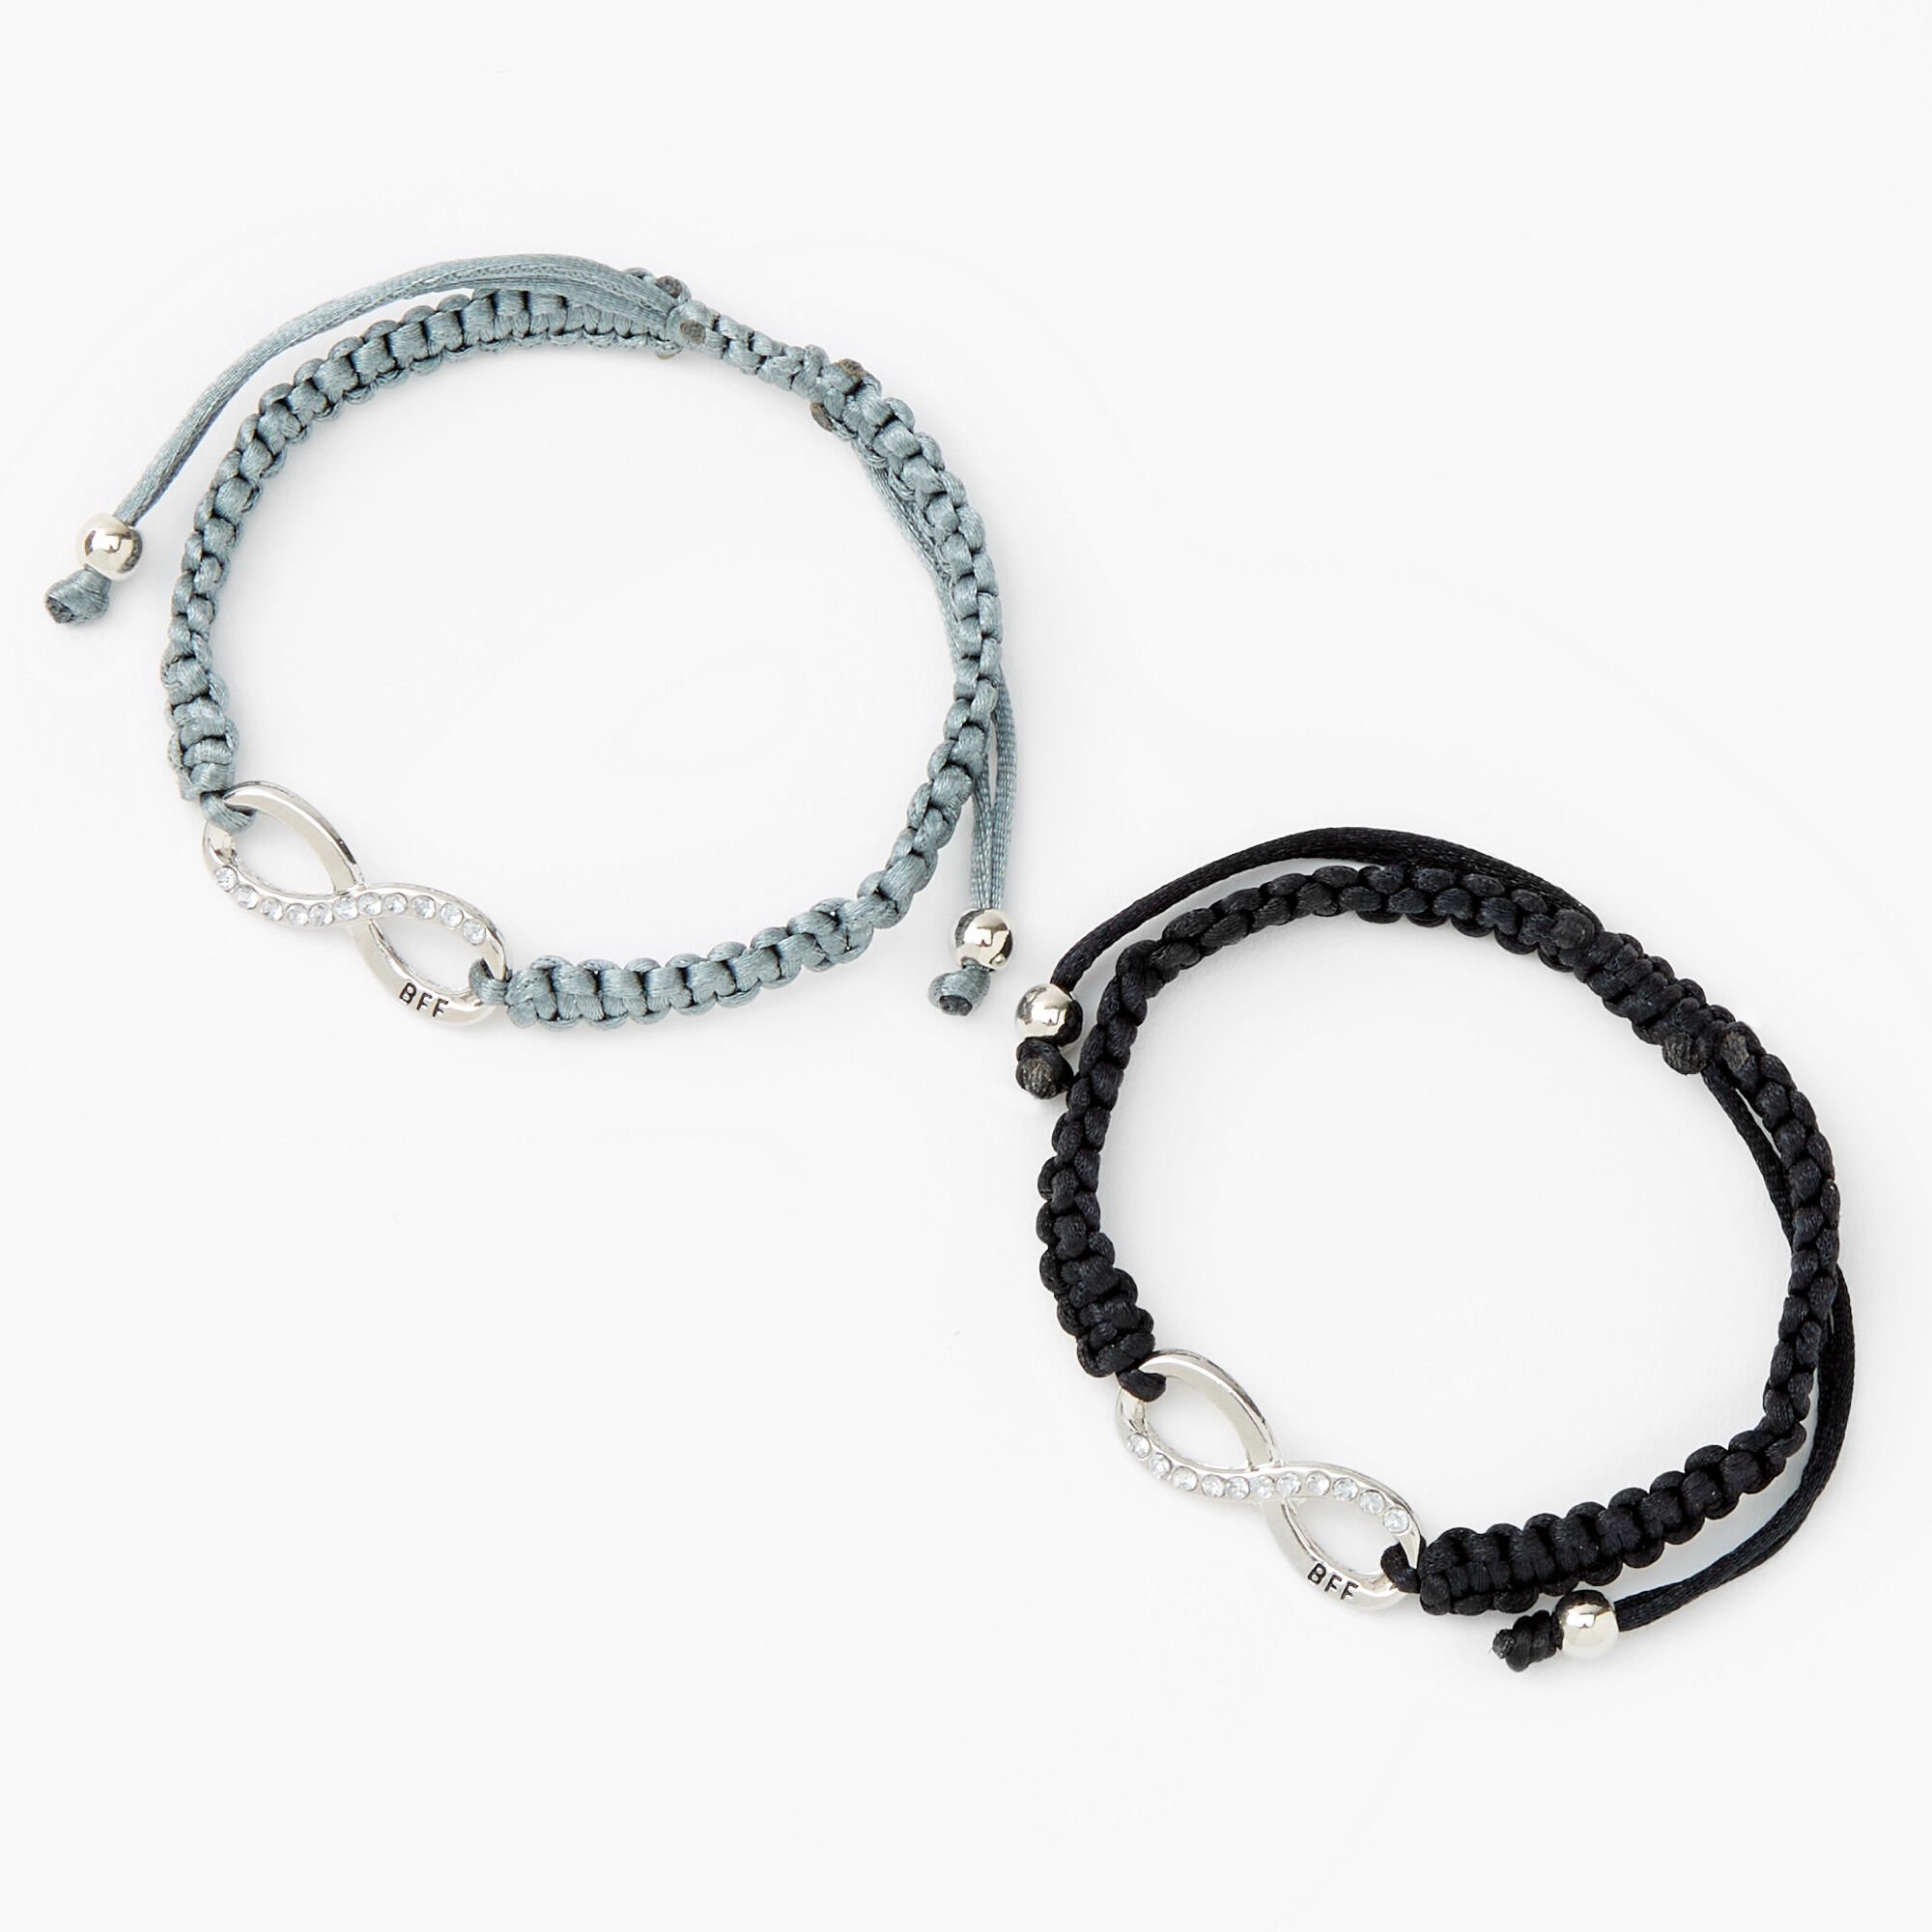 View Claires Infinity Adjustable Friendship Bracelets Gray 2 Pack Grey information